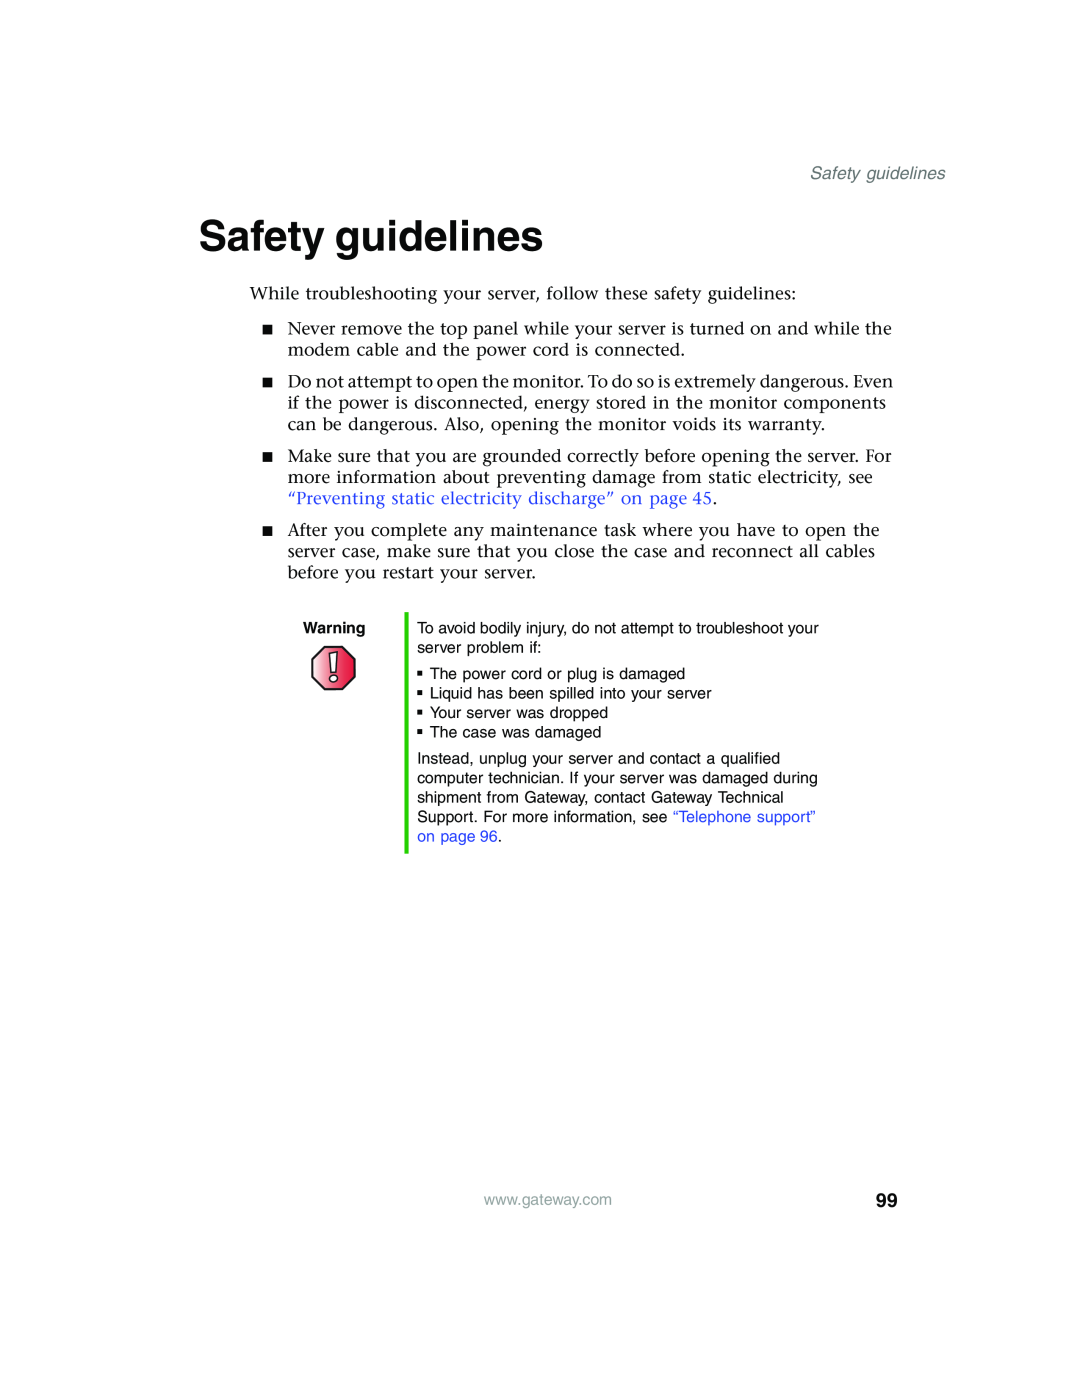 Gateway 955 manual Safety guidelines 